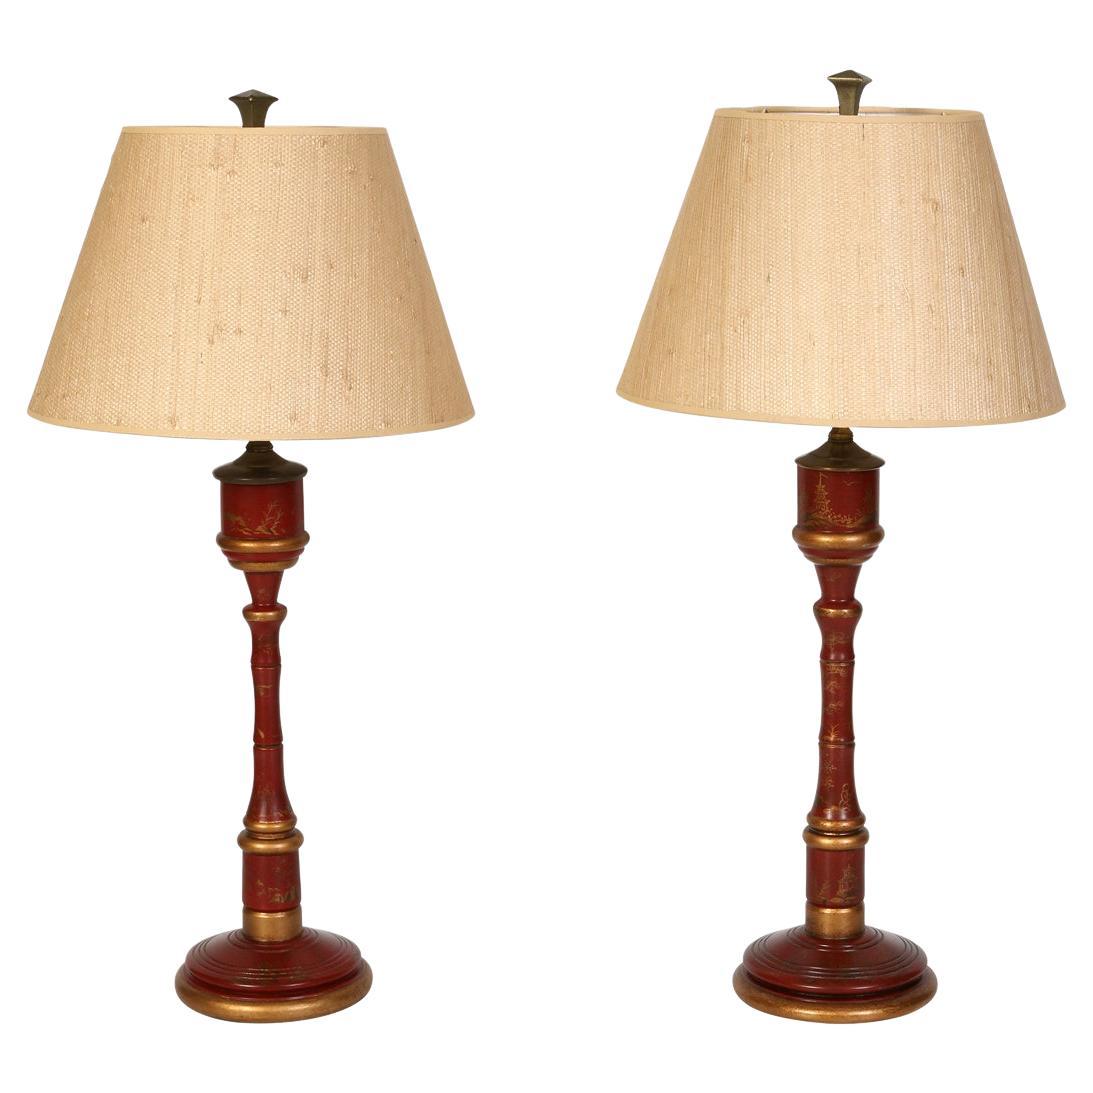 A Pair of Red Chinoiserie Decorated Lamps